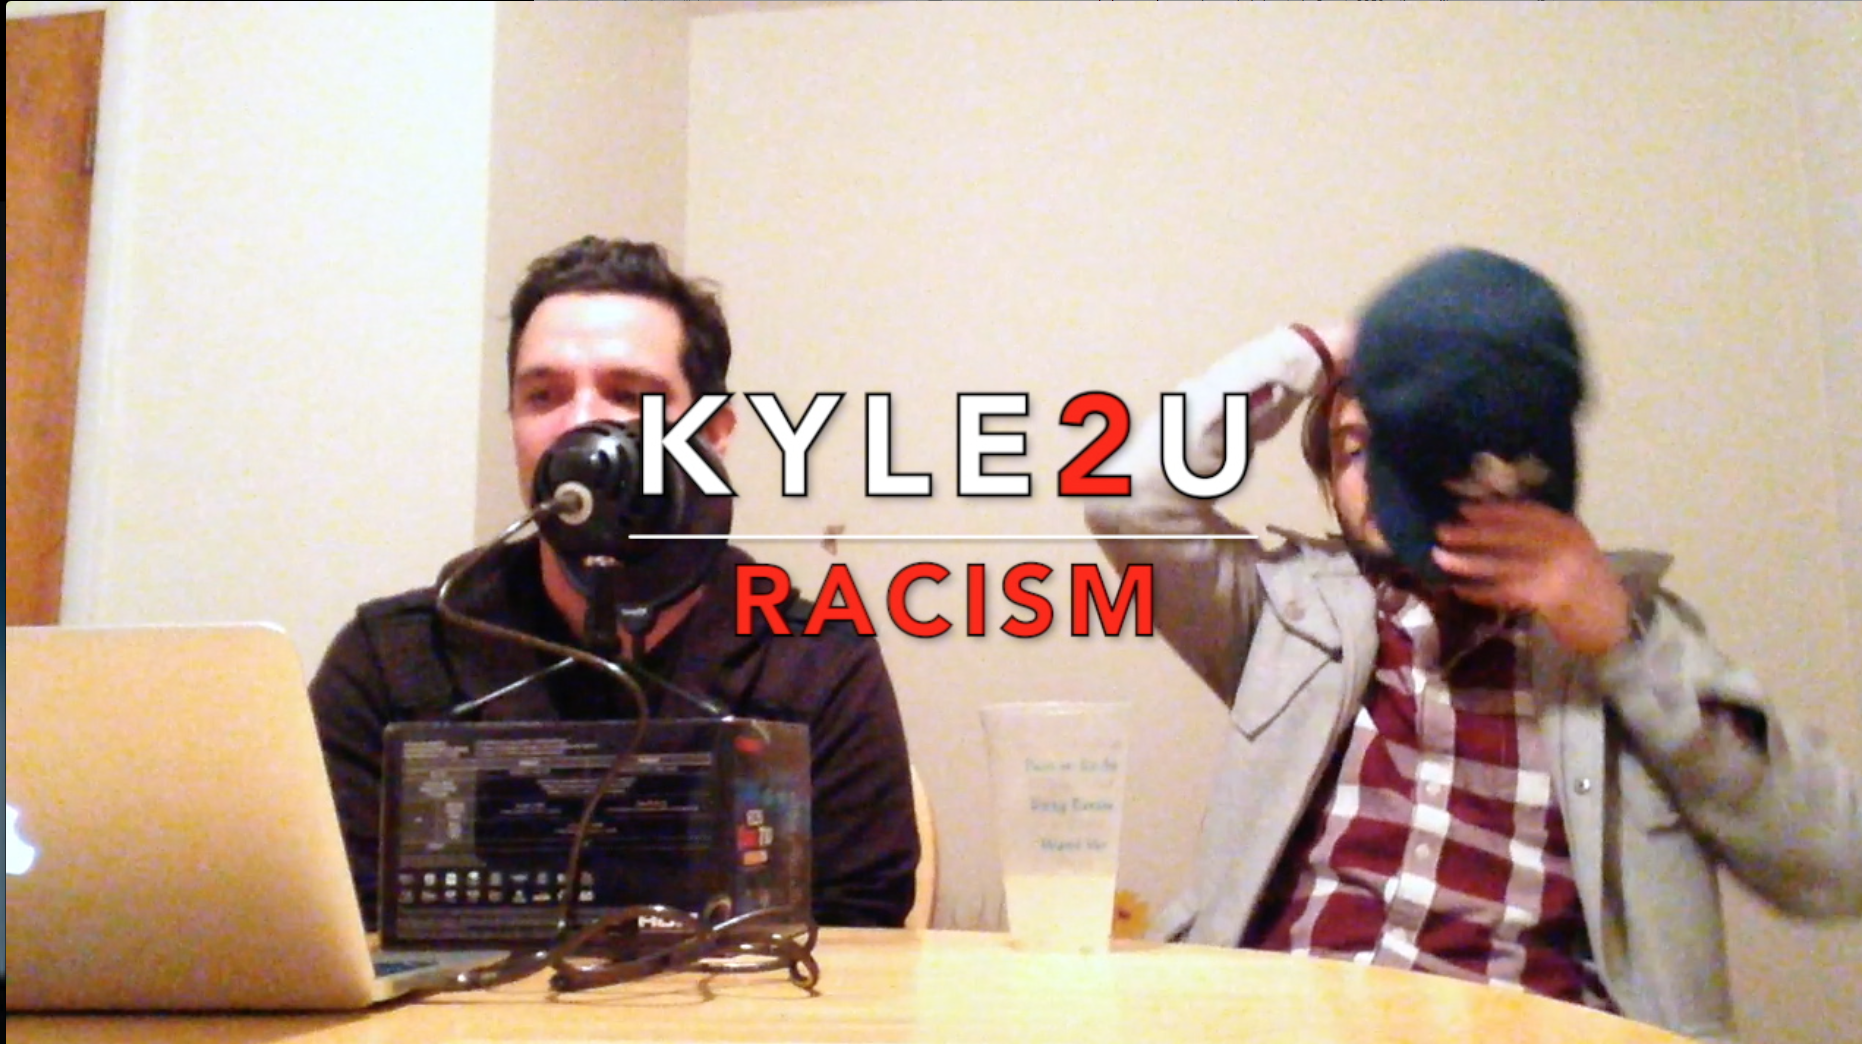 Kyle2U with Kyle McMahon, Racism title card. Season 1, Episode 1. January 8, 2016. Featuring Brandon Reed.